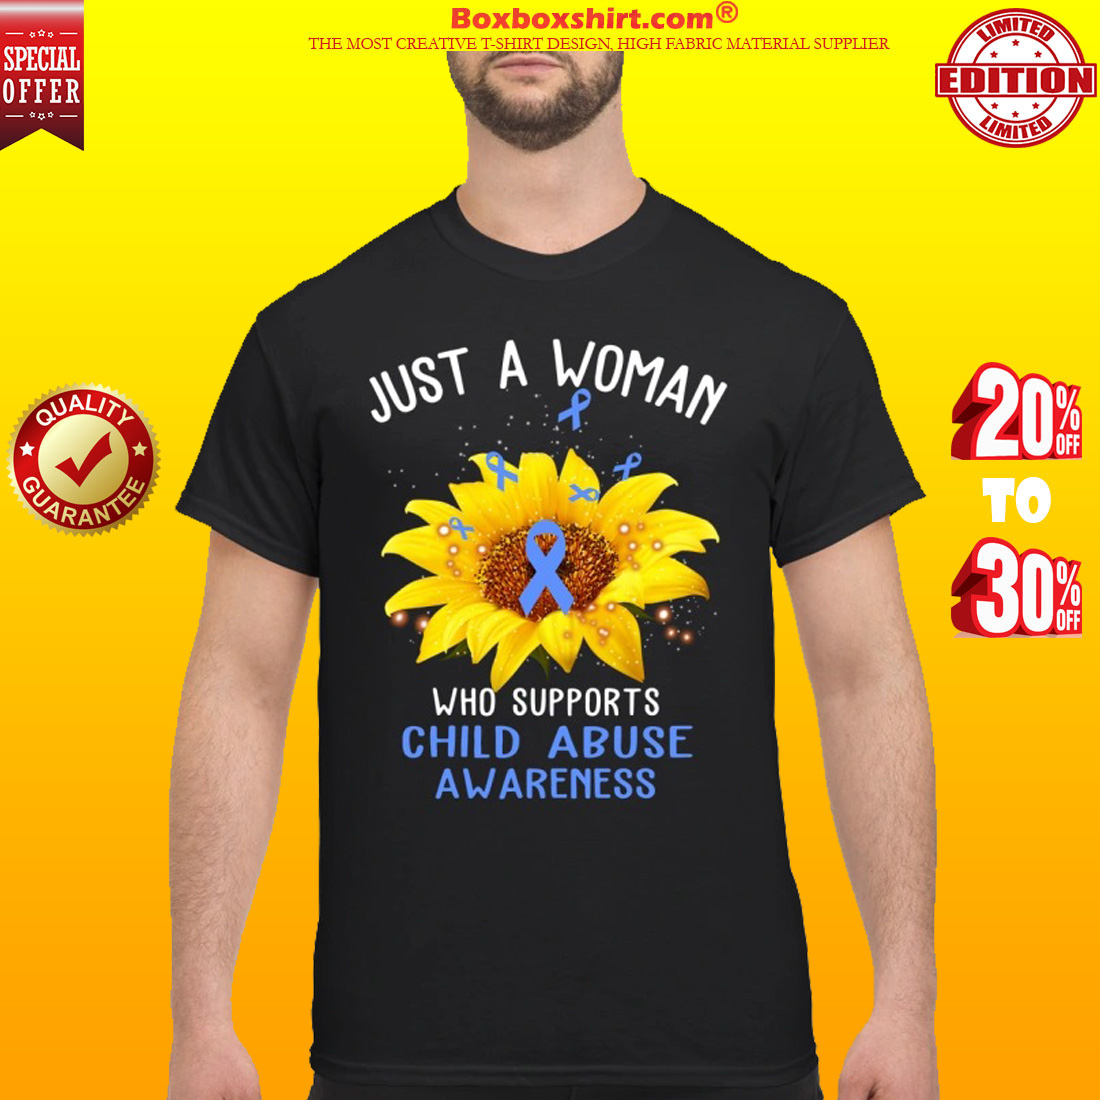 Just a woman who supports child abuse awareness classic shirt